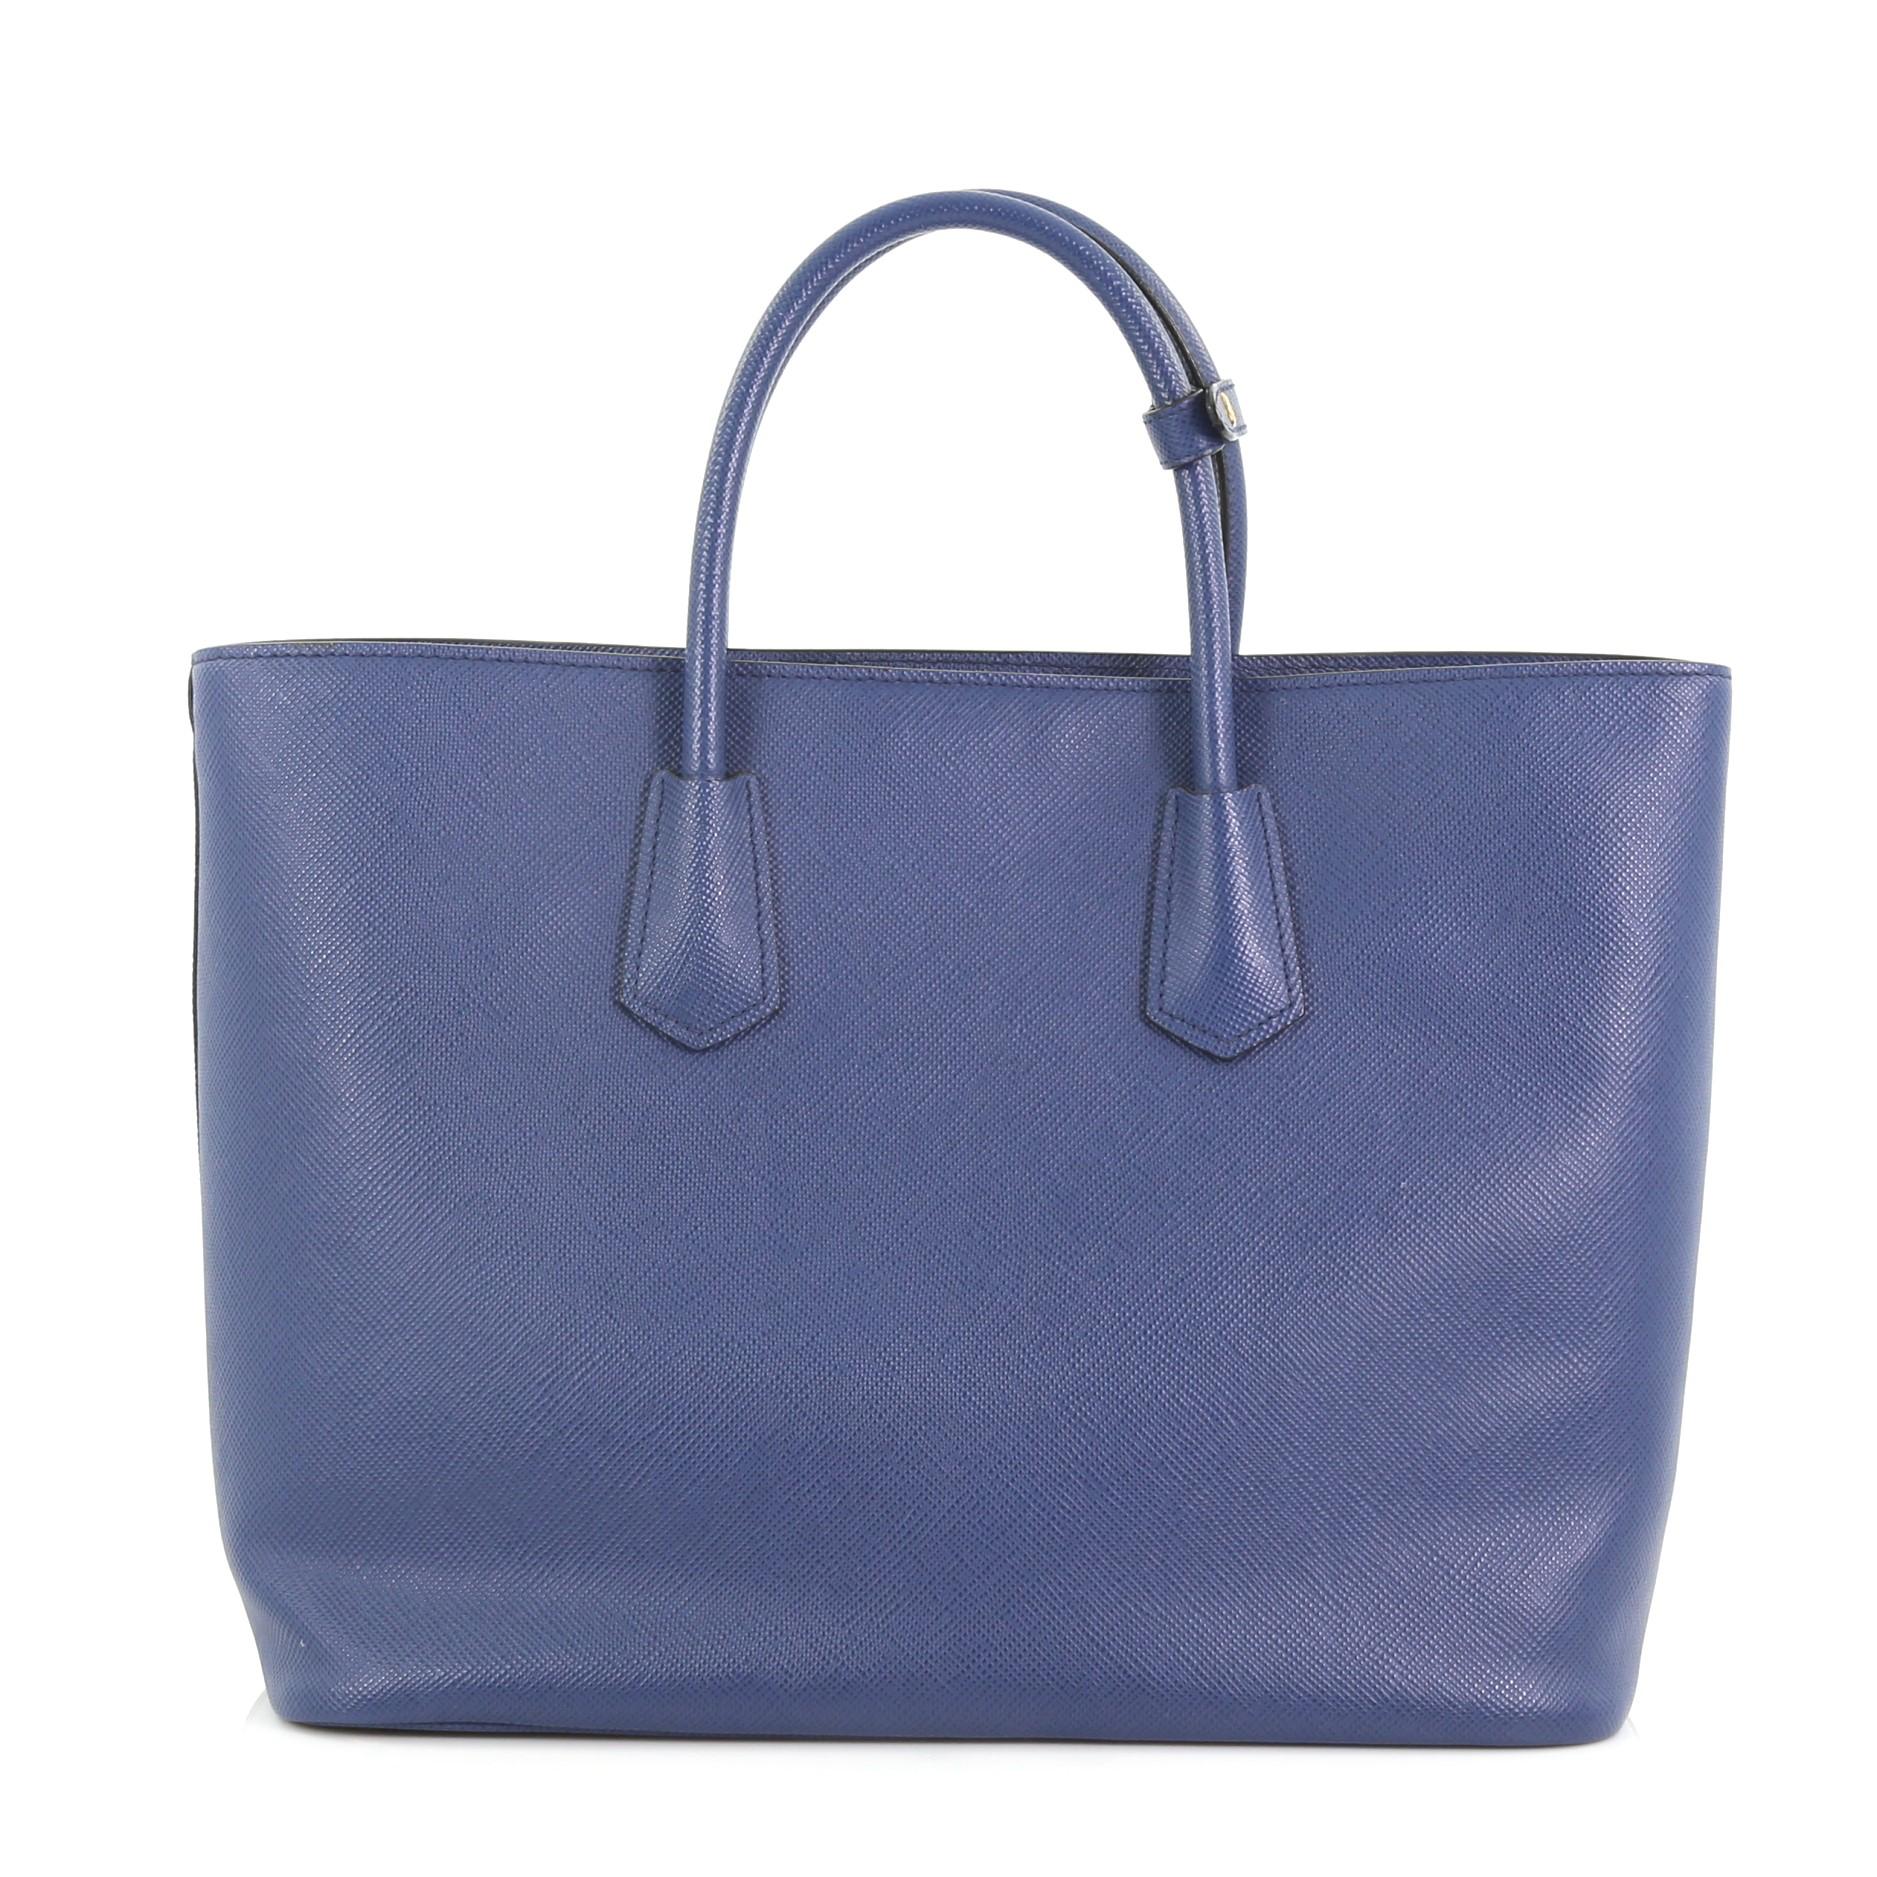 Prada Front Pocket Convertible Tote Saffiano Leather im Zustand „Gut“ in NY, NY